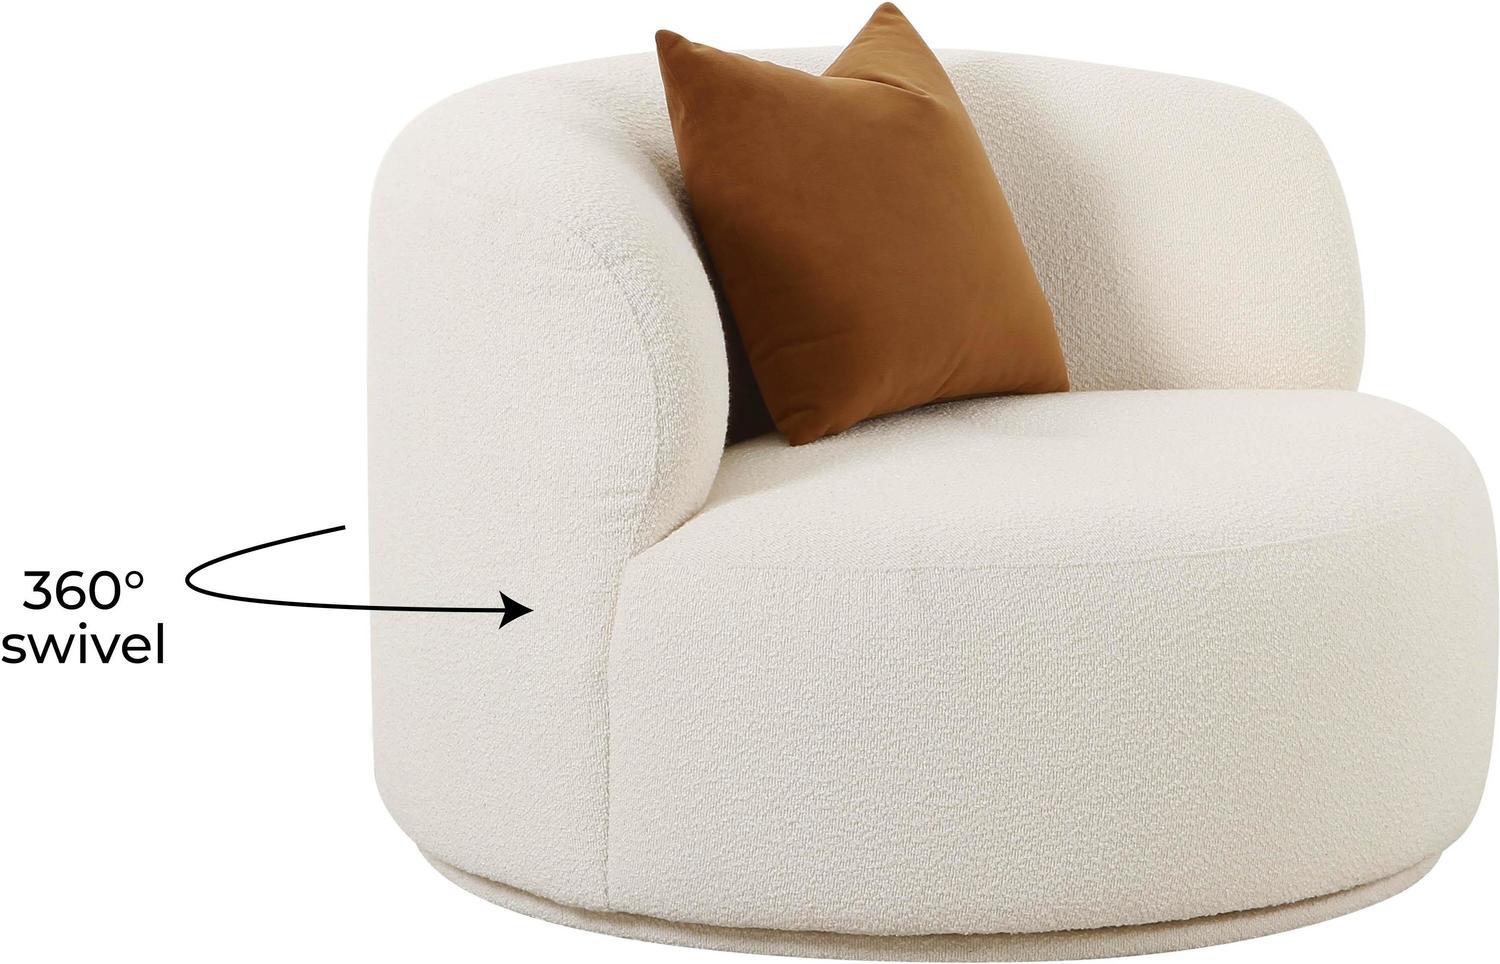 arm chair for bedroom Contemporary Design Furniture Accent Chairs Cream